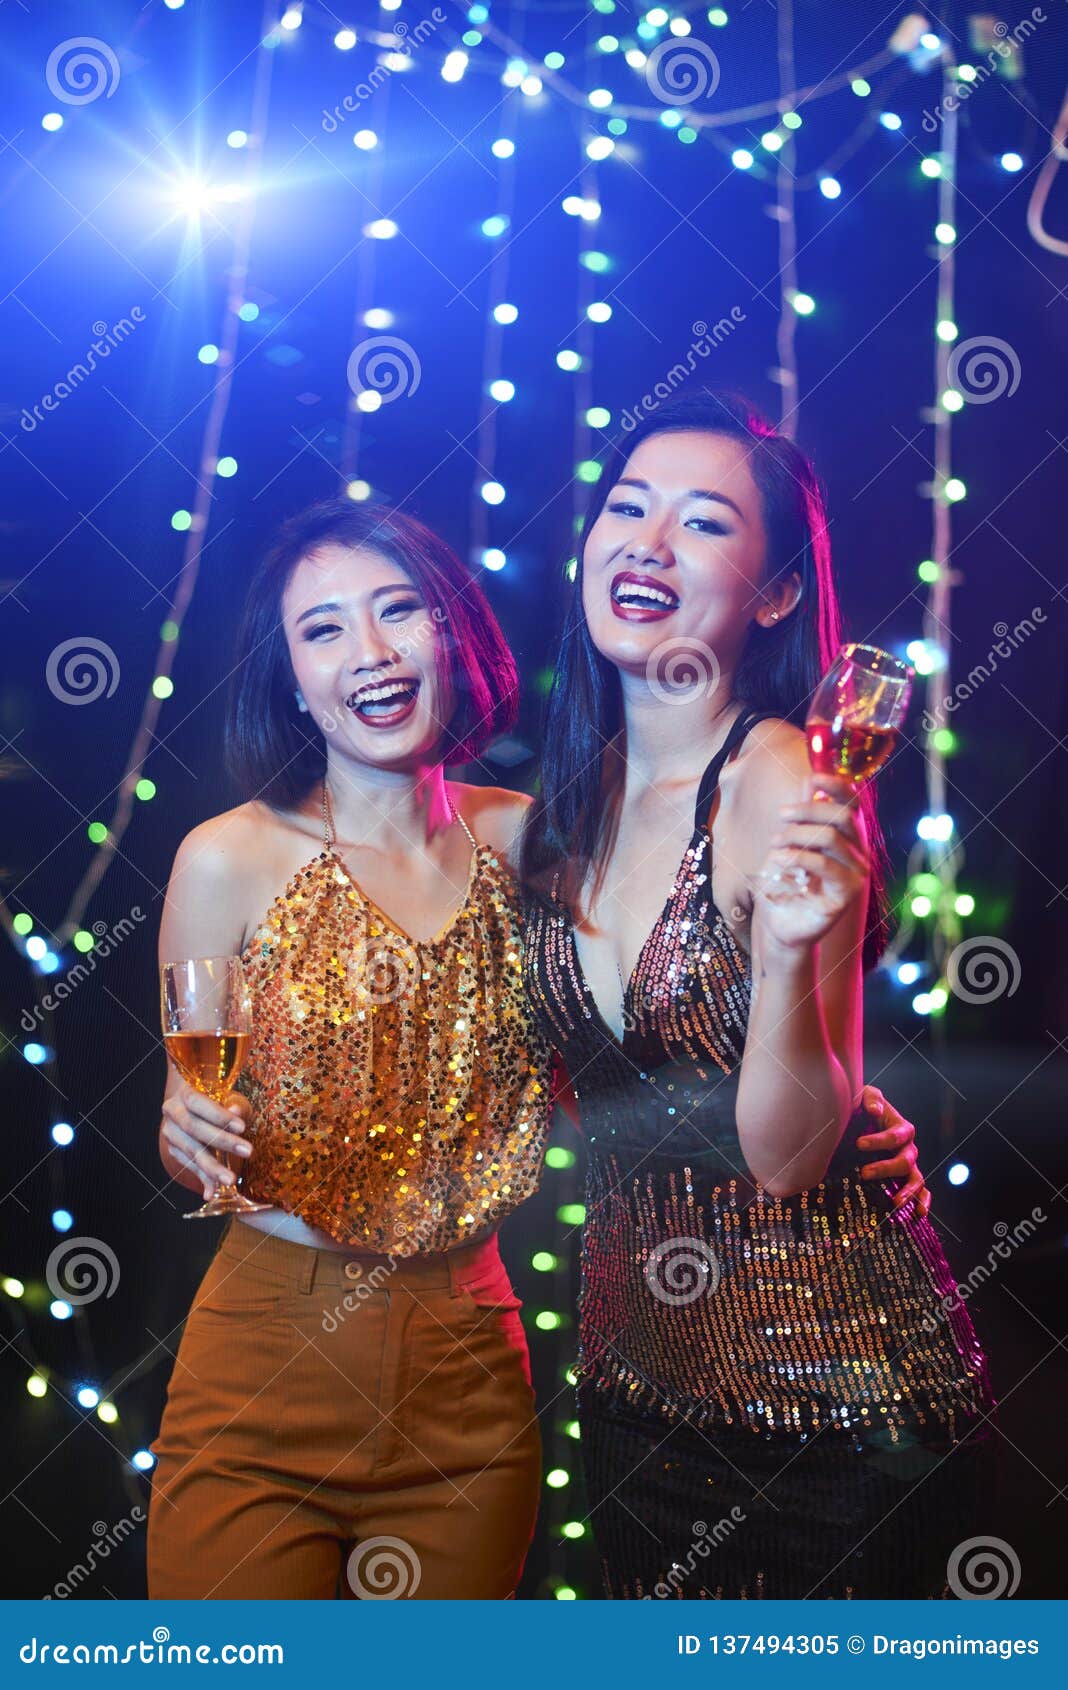 Pretty women in night club stock image. Image of young - 137494305